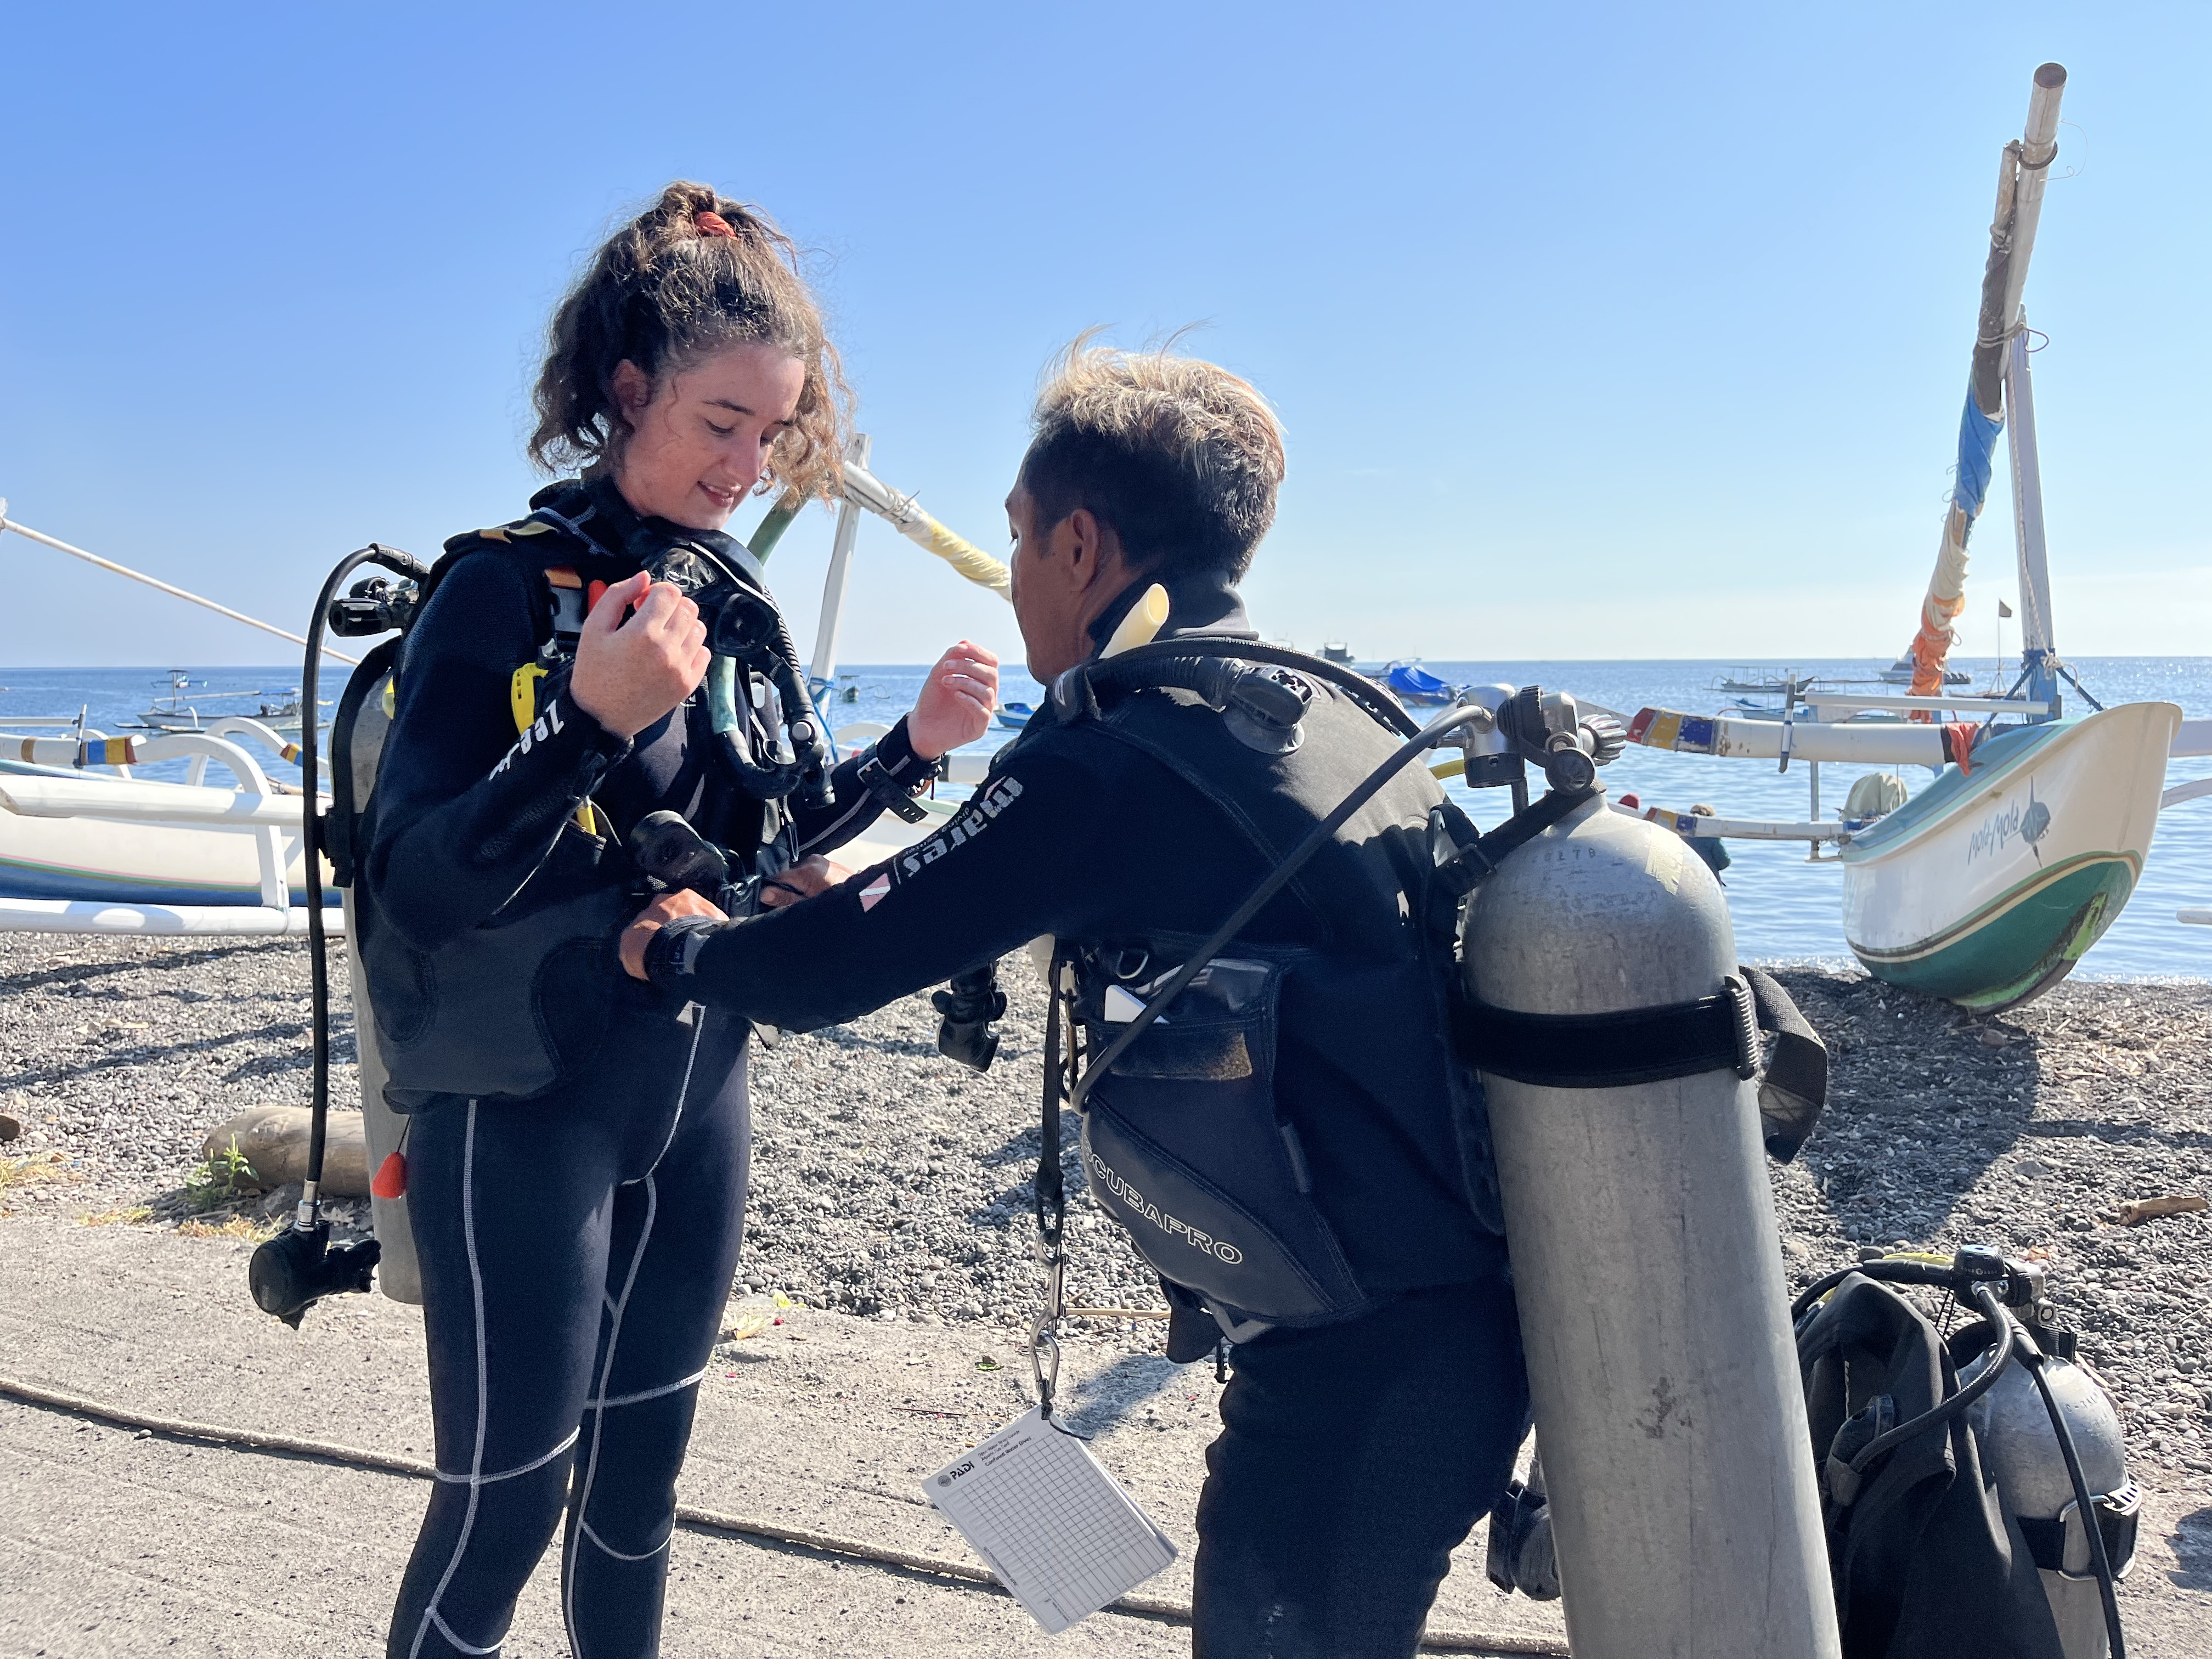 Instructor Gede and student Eloise checking their weight belts as part of the BWRAF buddy check of the PADI Open Water diver course in Amed, Bali